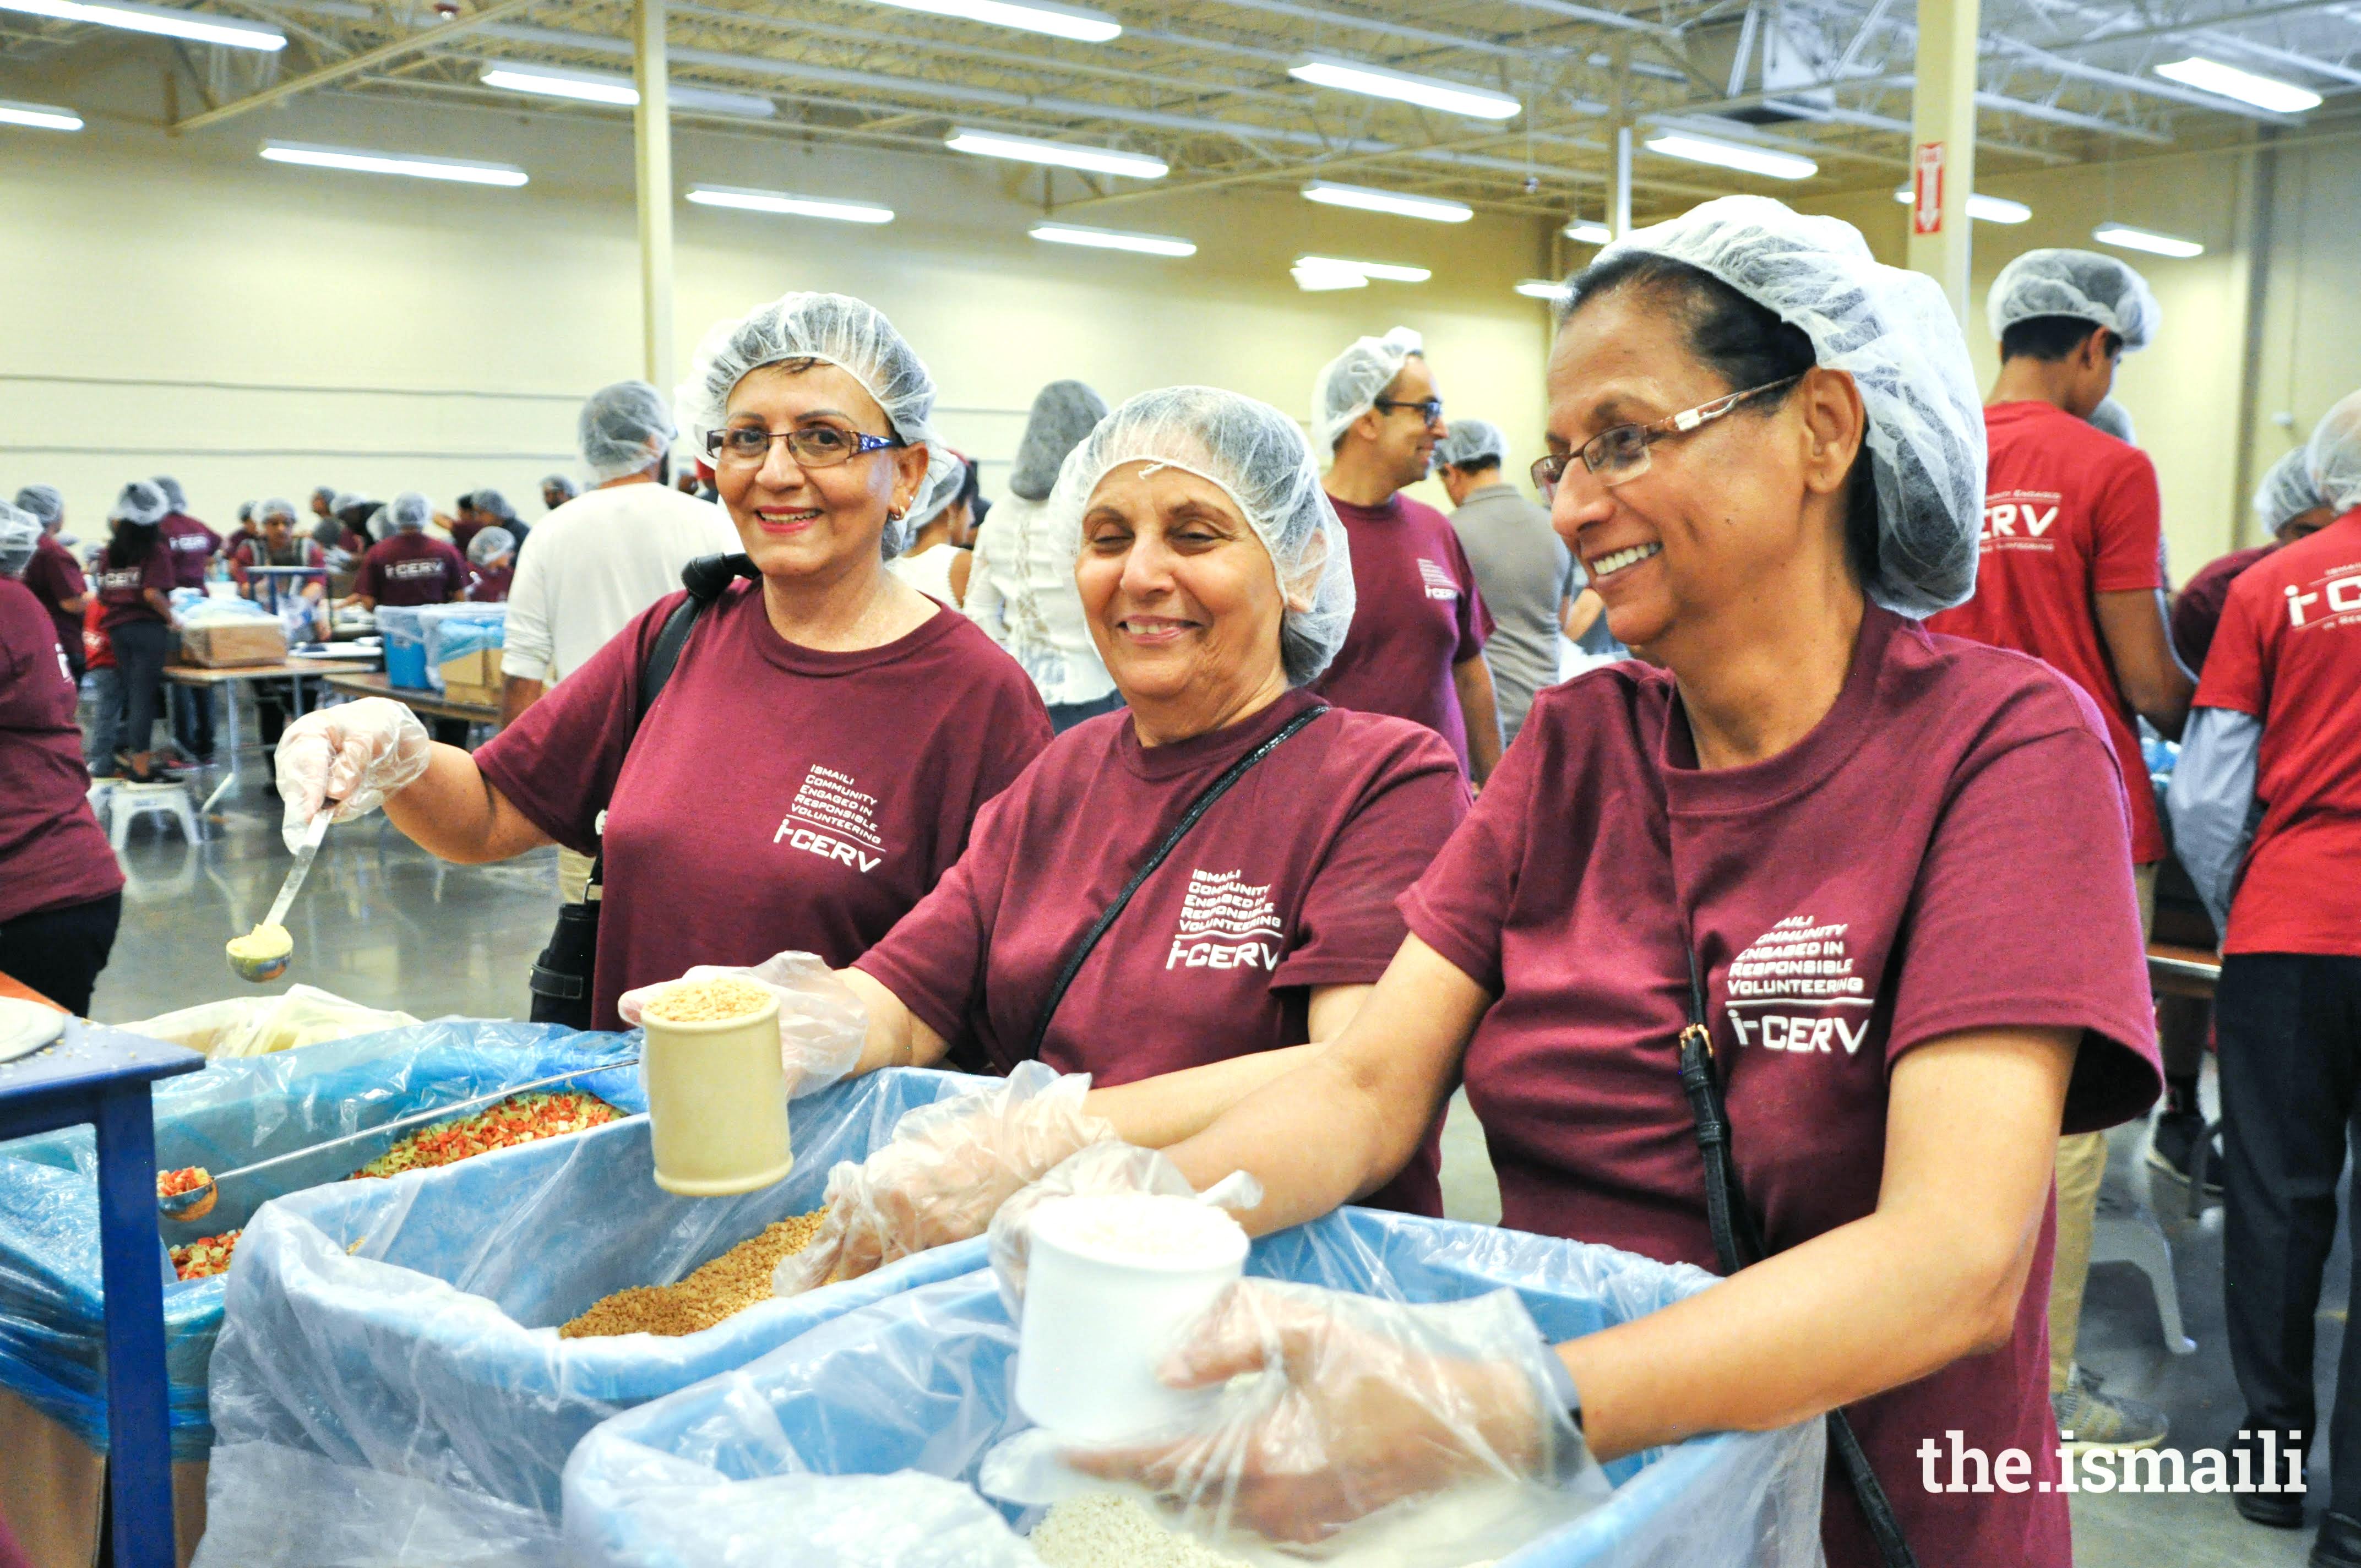 I-CERV volunteers and others packing 155,000 nutritional packs in partnership with Feed My Starving Children, Chicago.